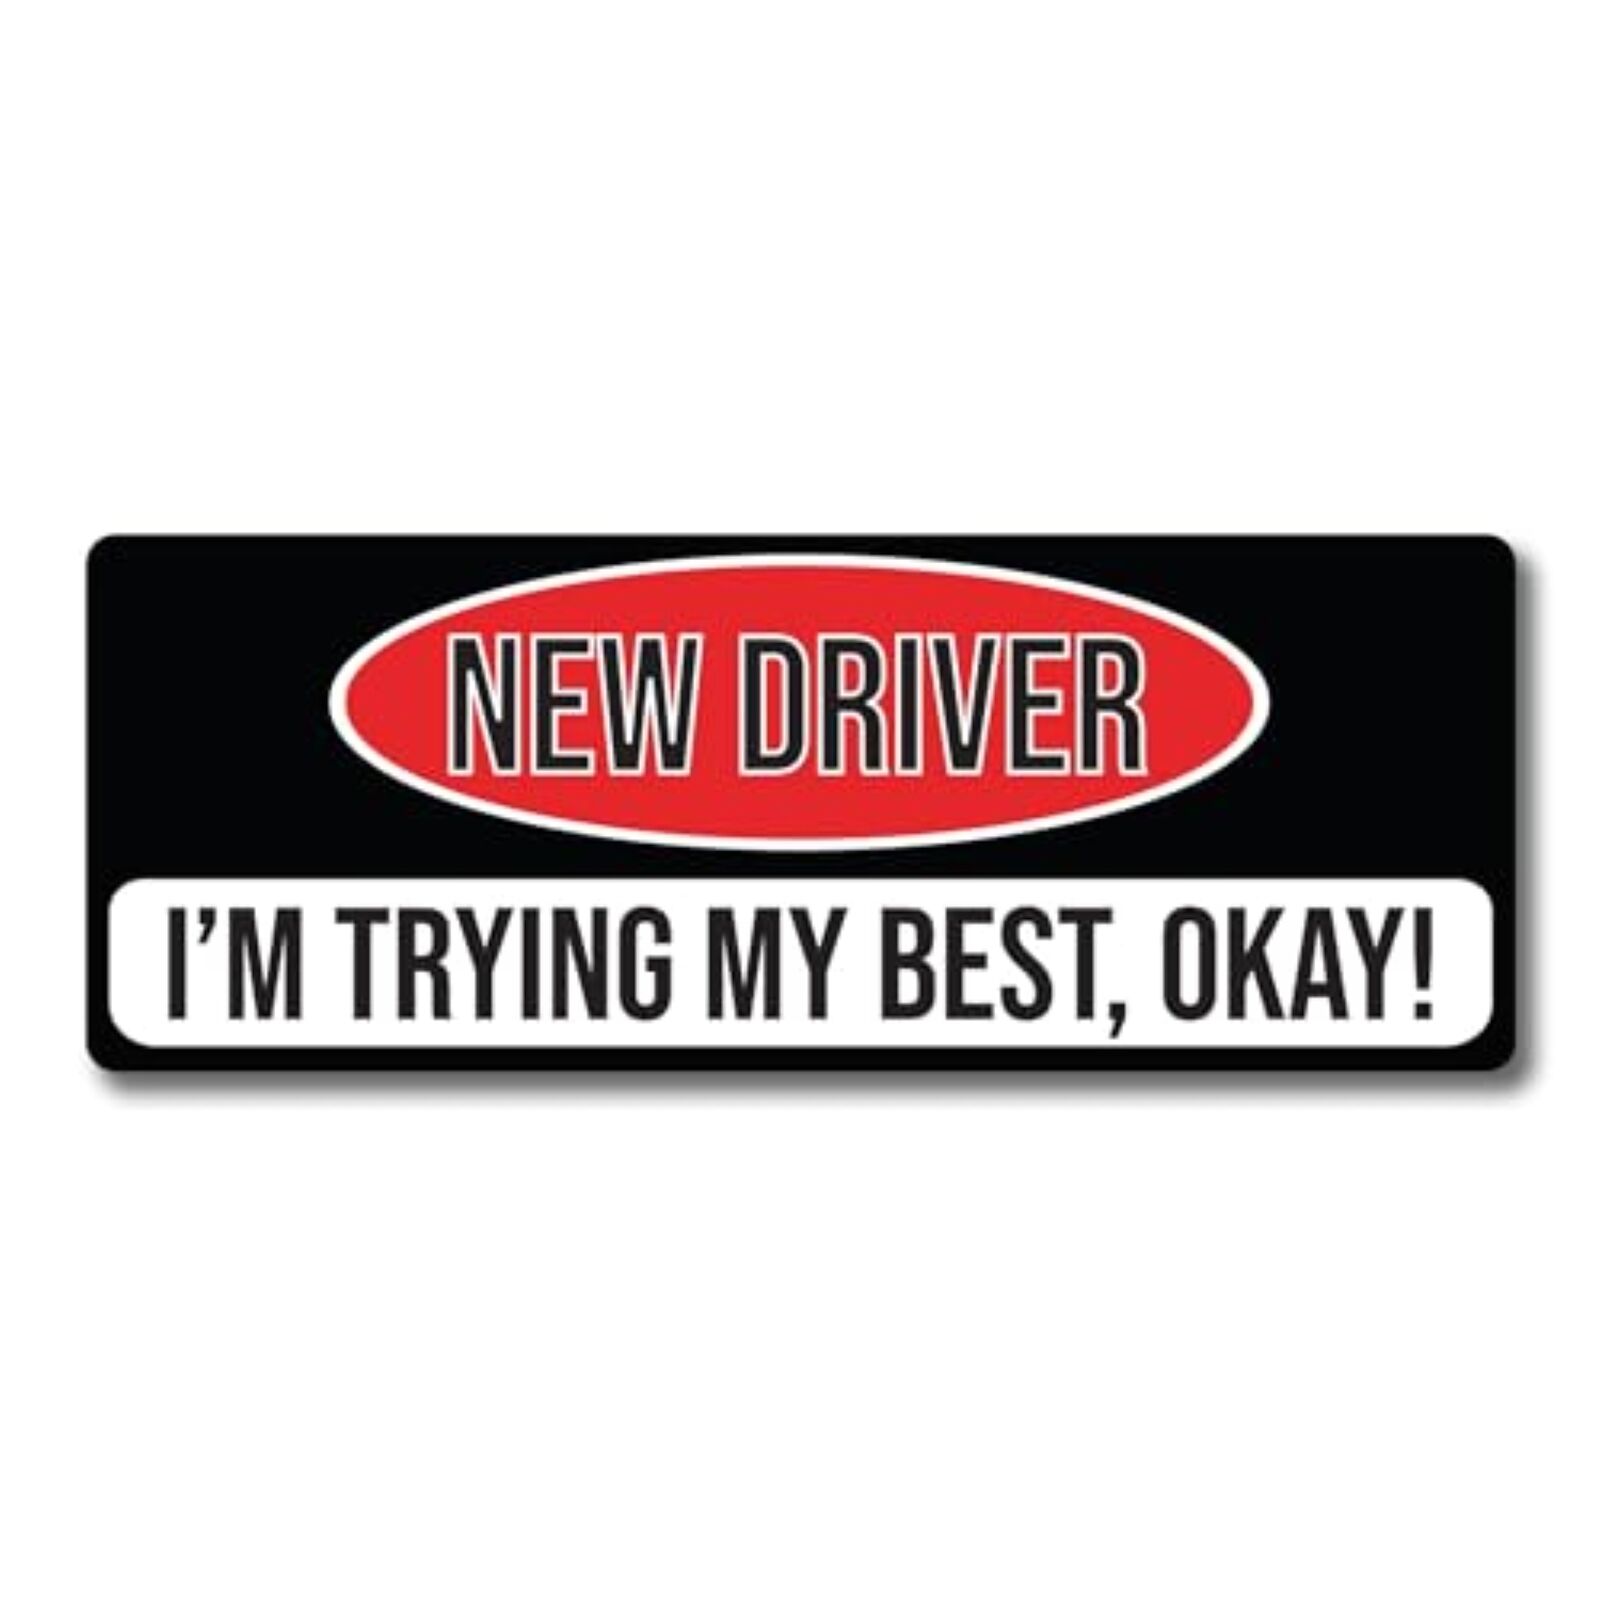 Magnet Me Up New Driver I'm Trying My Best, Okay Magnet Decal, 3x8 inch